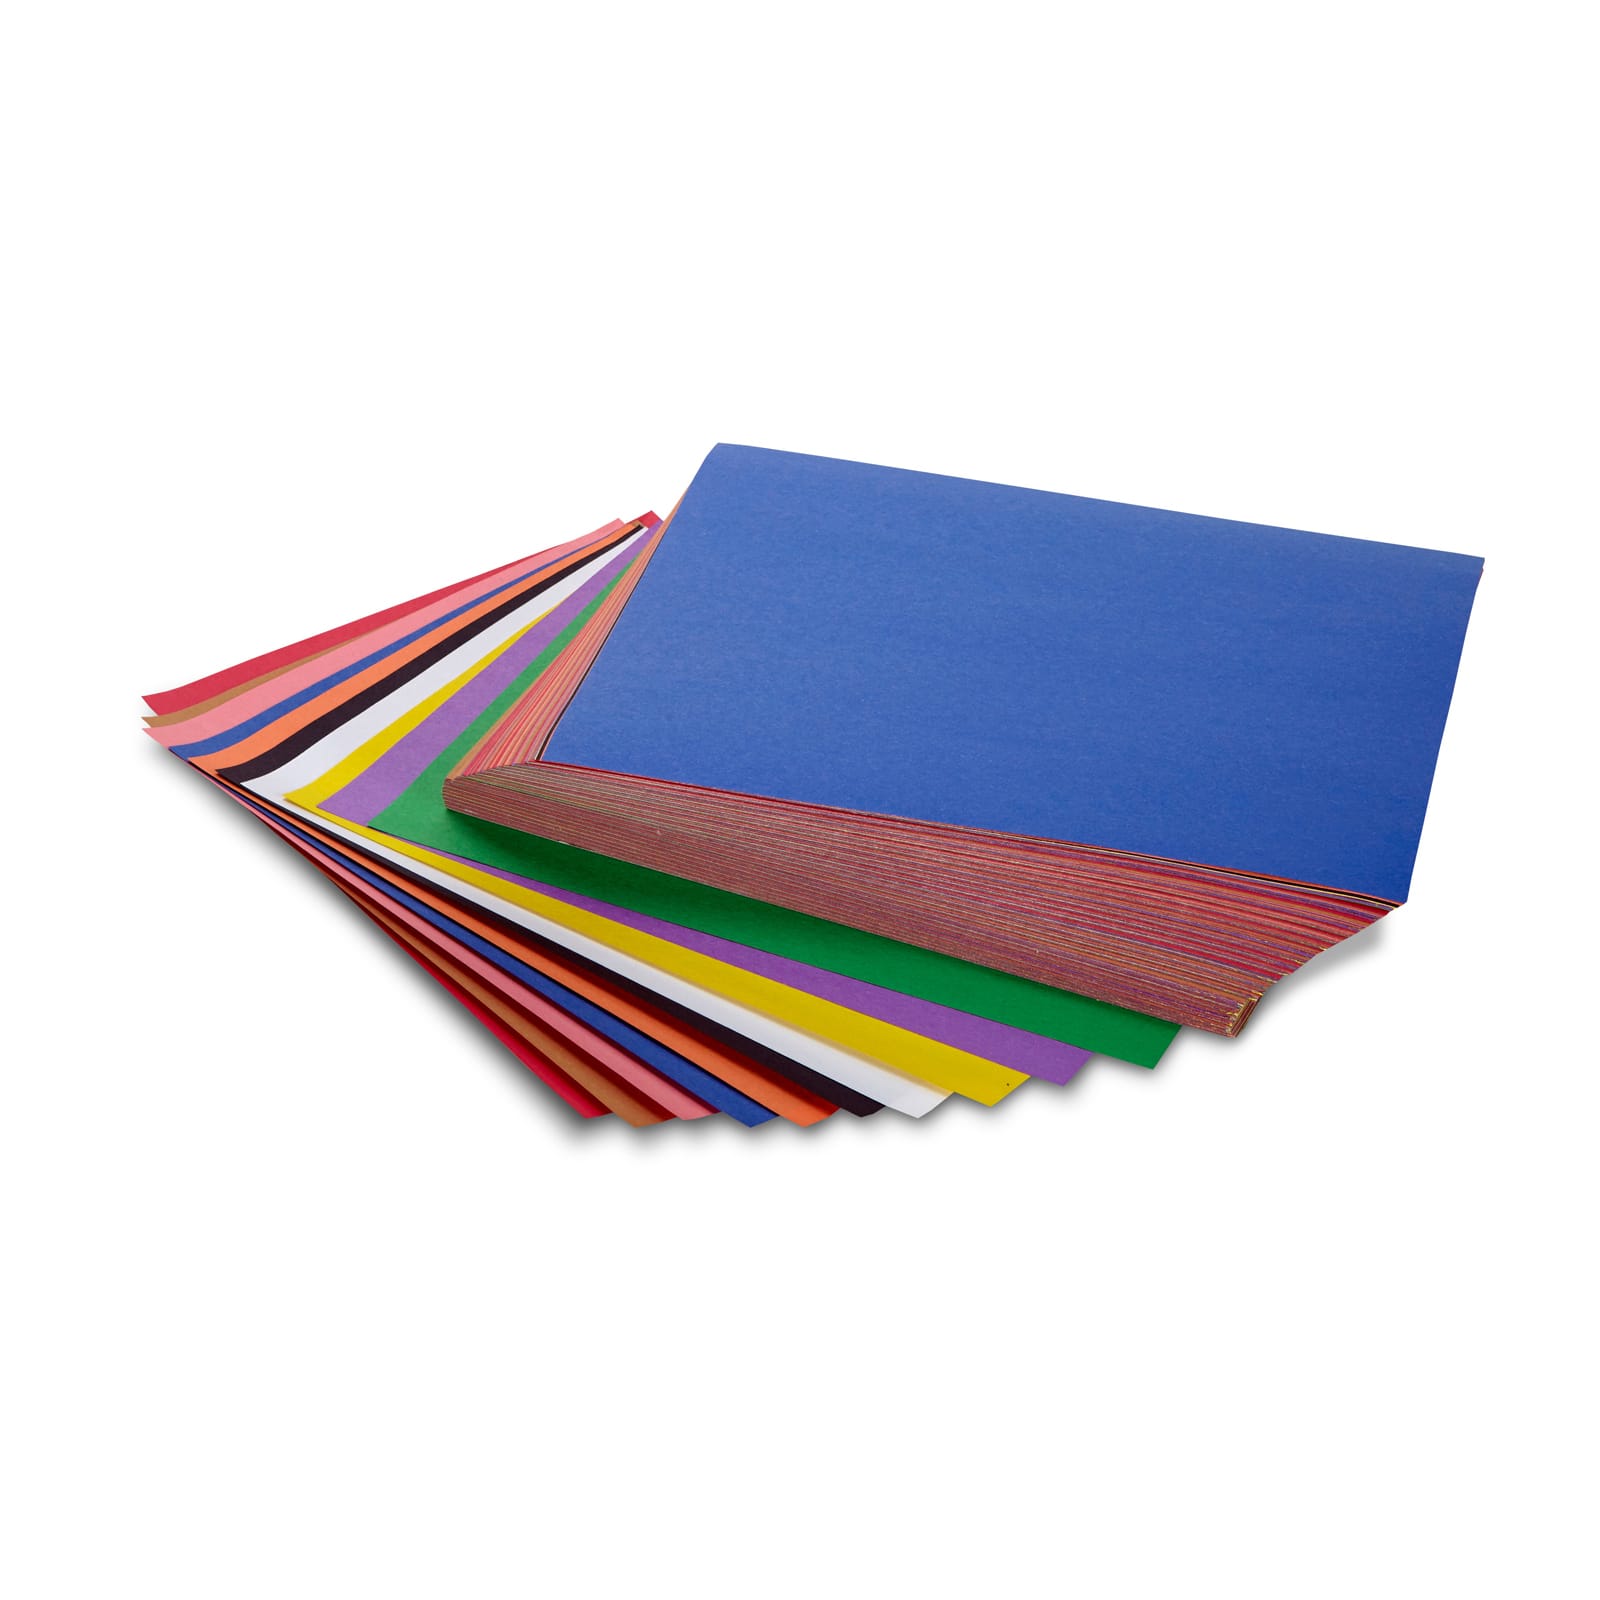 Crayola Construction Paper Pack, 9 x 12 - 240 sheets